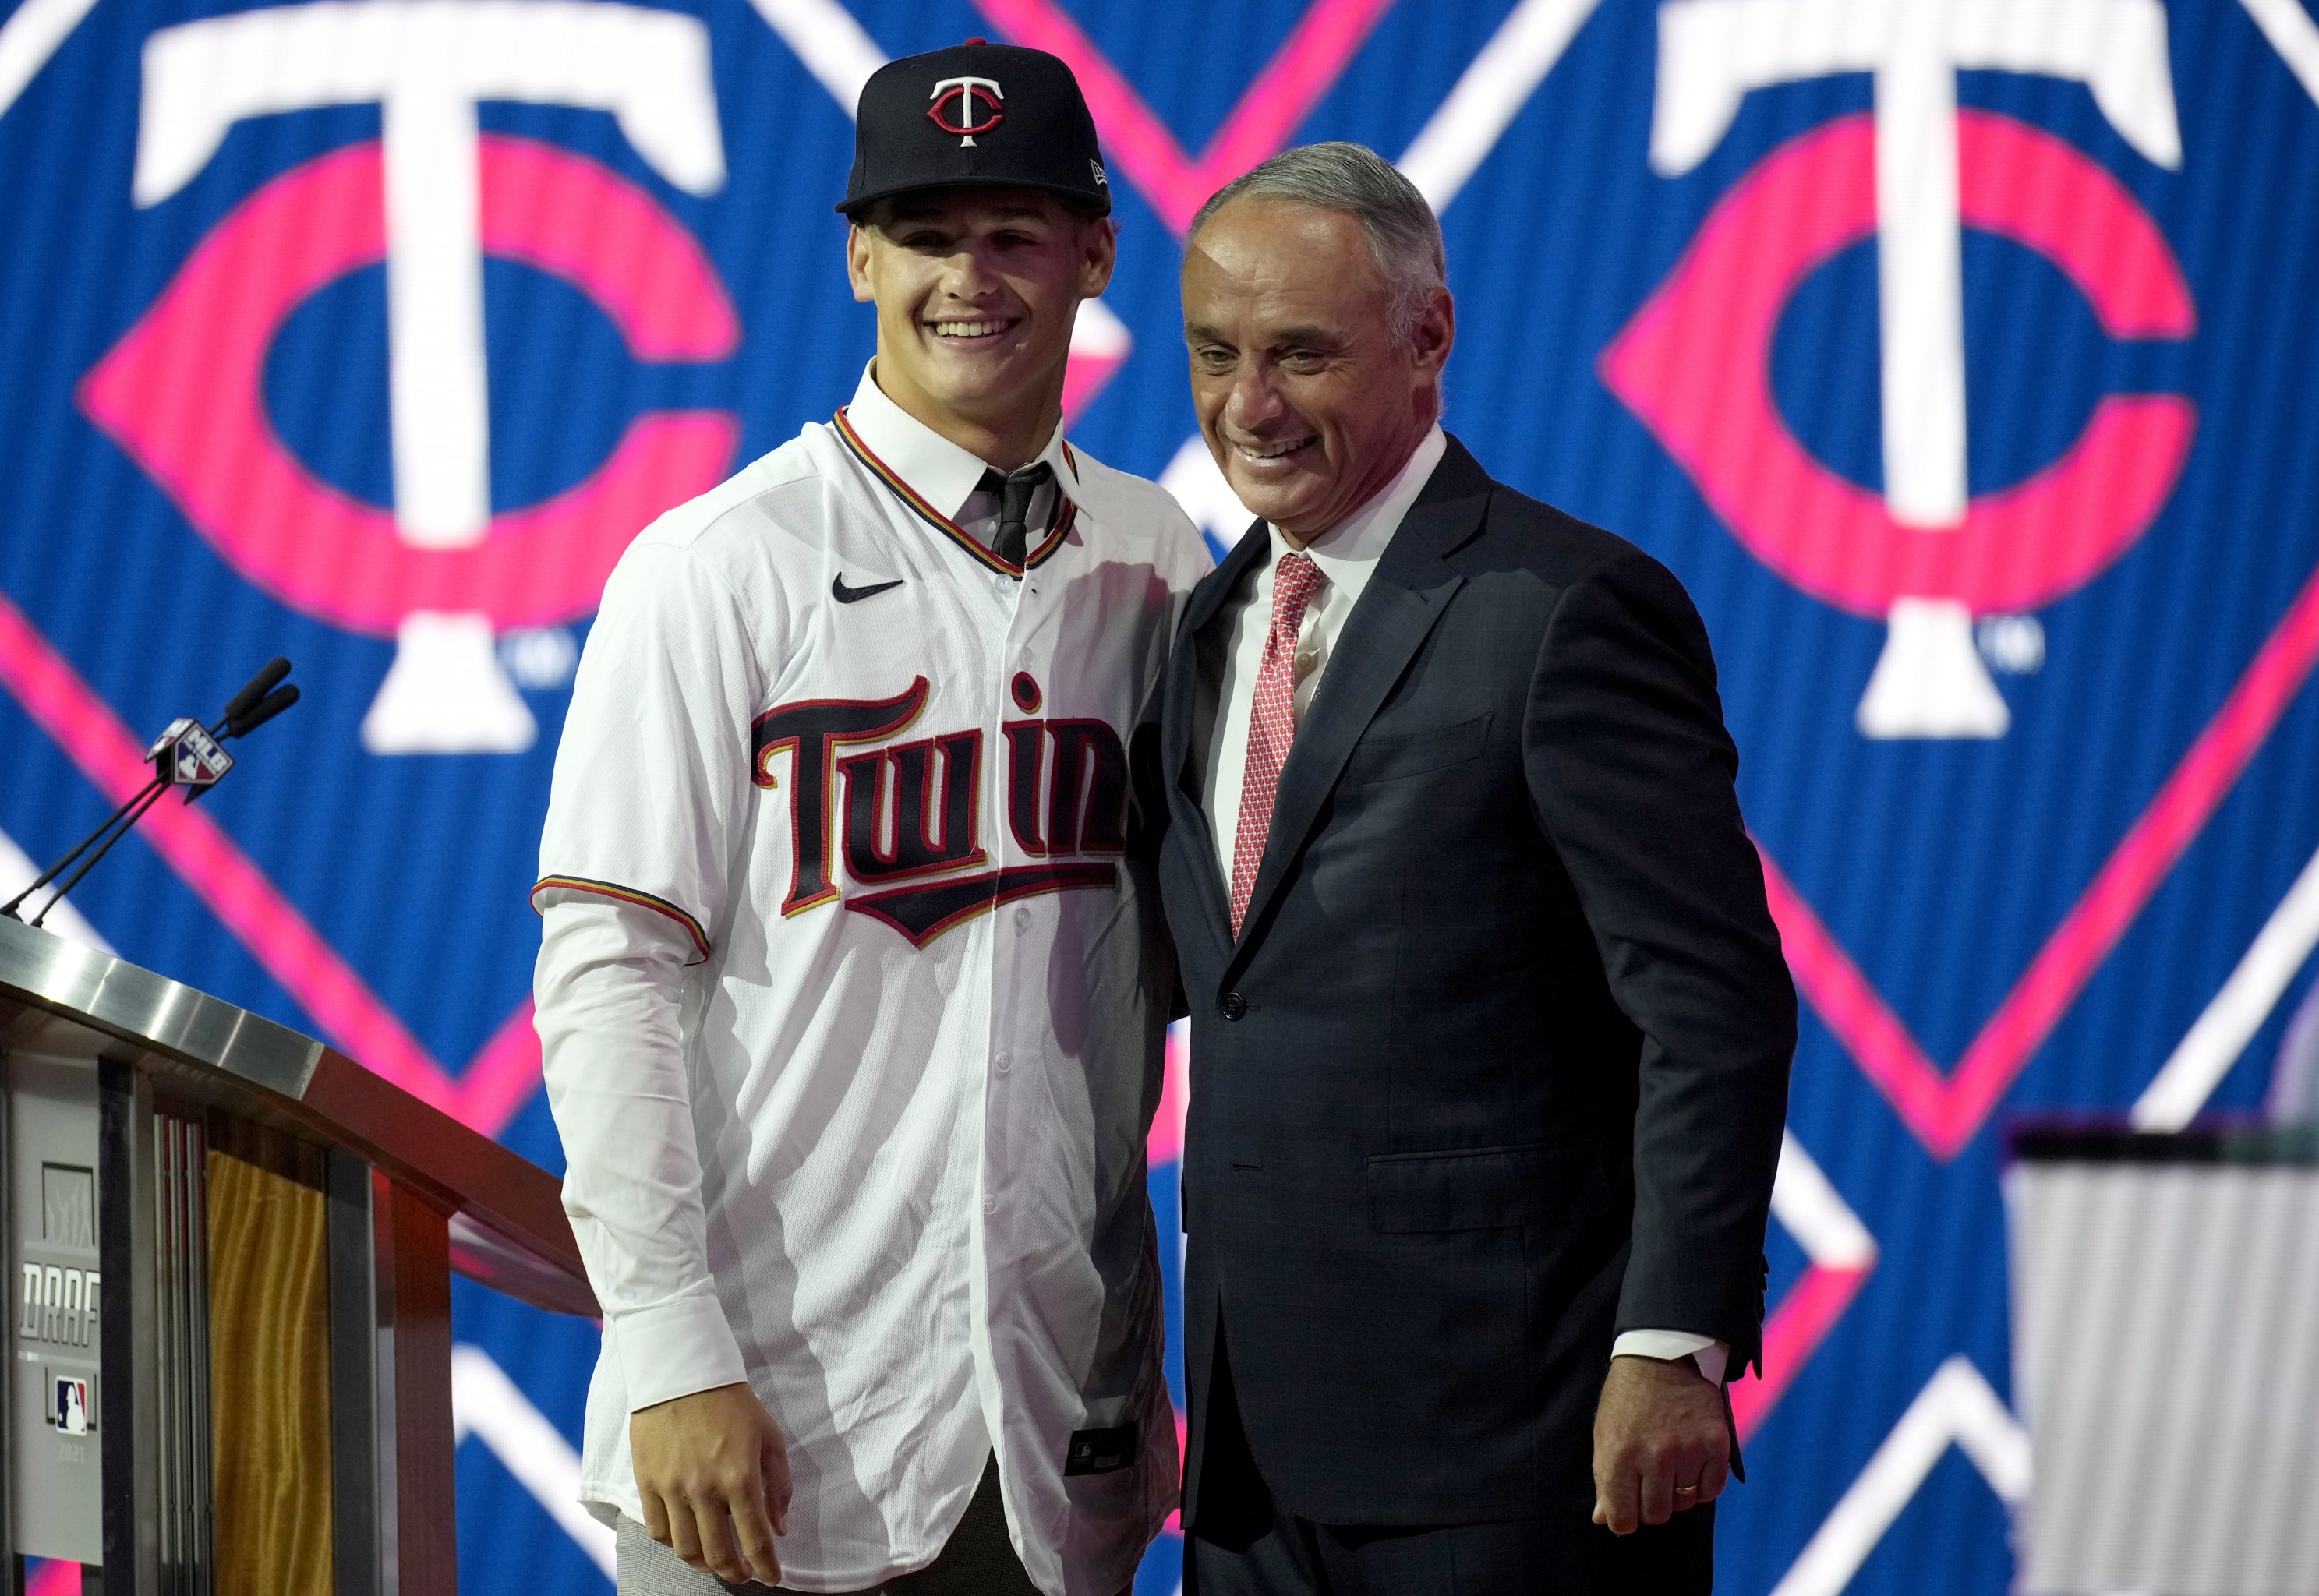 Report: 2021 MLB Draft will be 20 rounds long